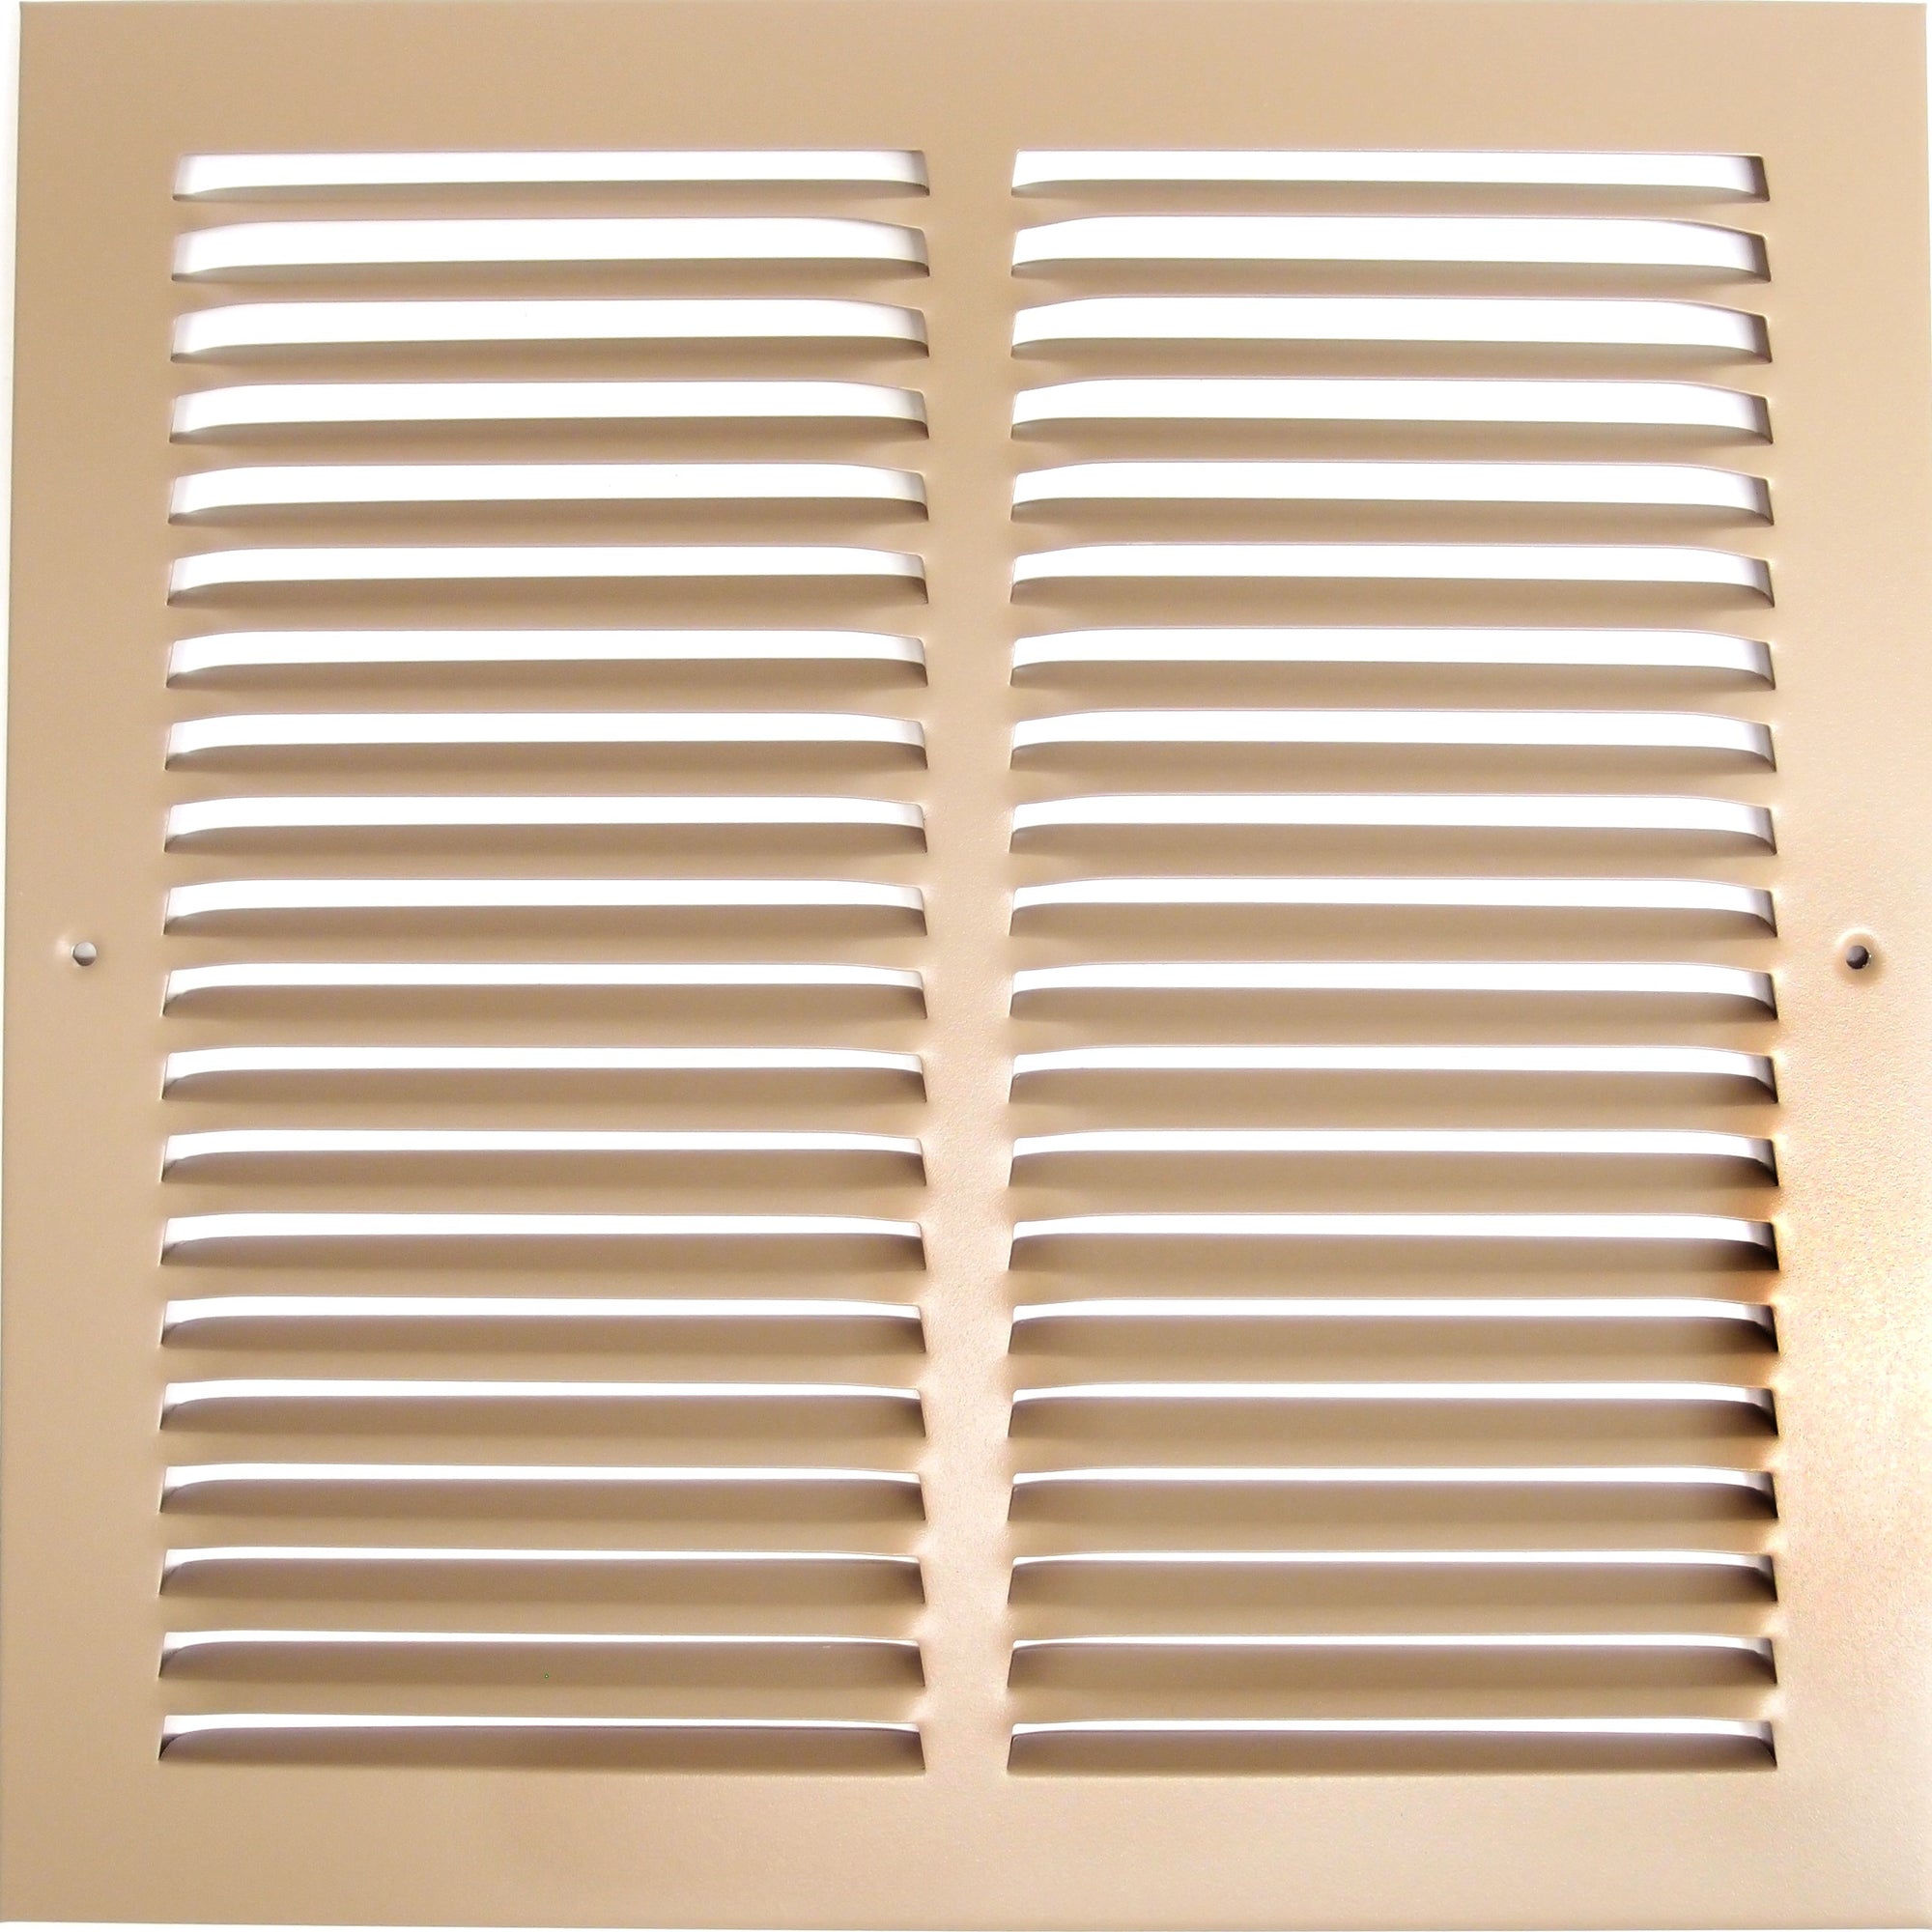 14" X 10" Air Vent Return Grilles - Sidewall and Ceiling - Steel